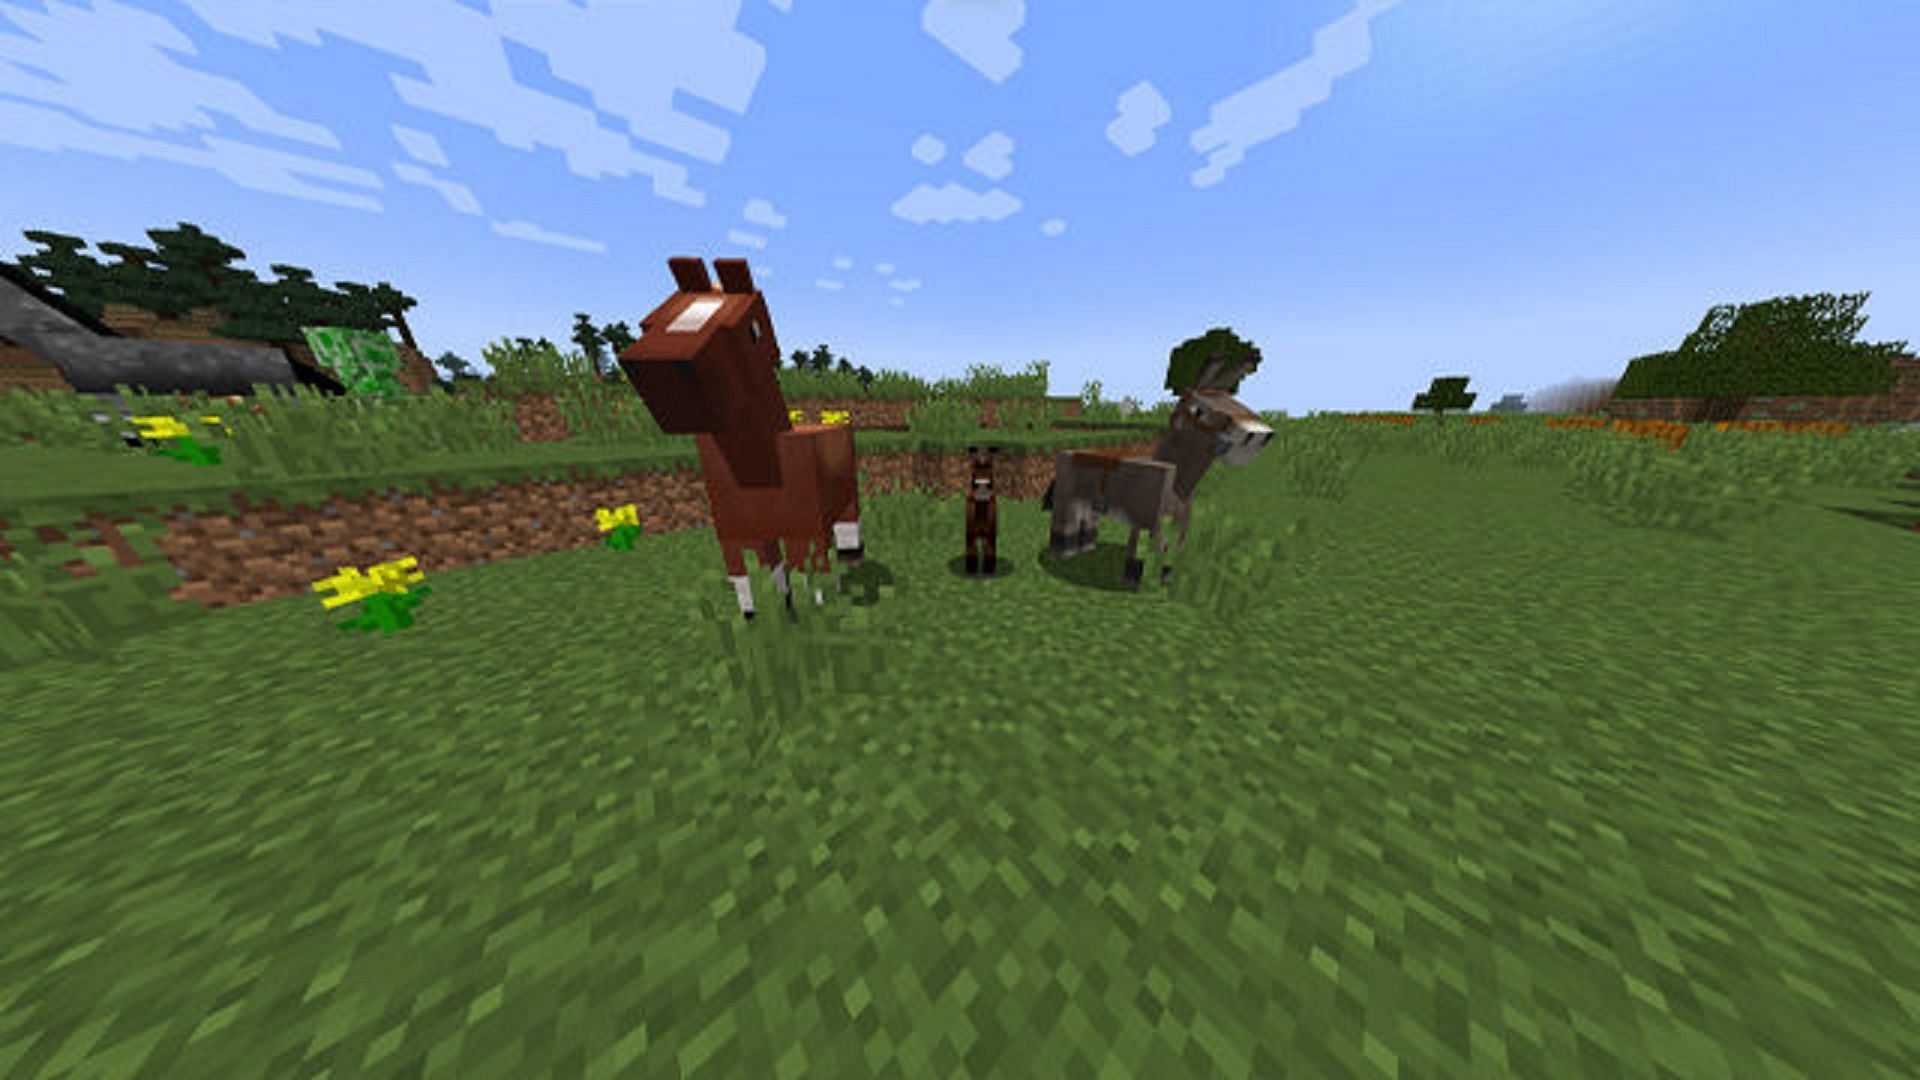 A horse, mule, and donkey in Minecraft (Image via Mojang)